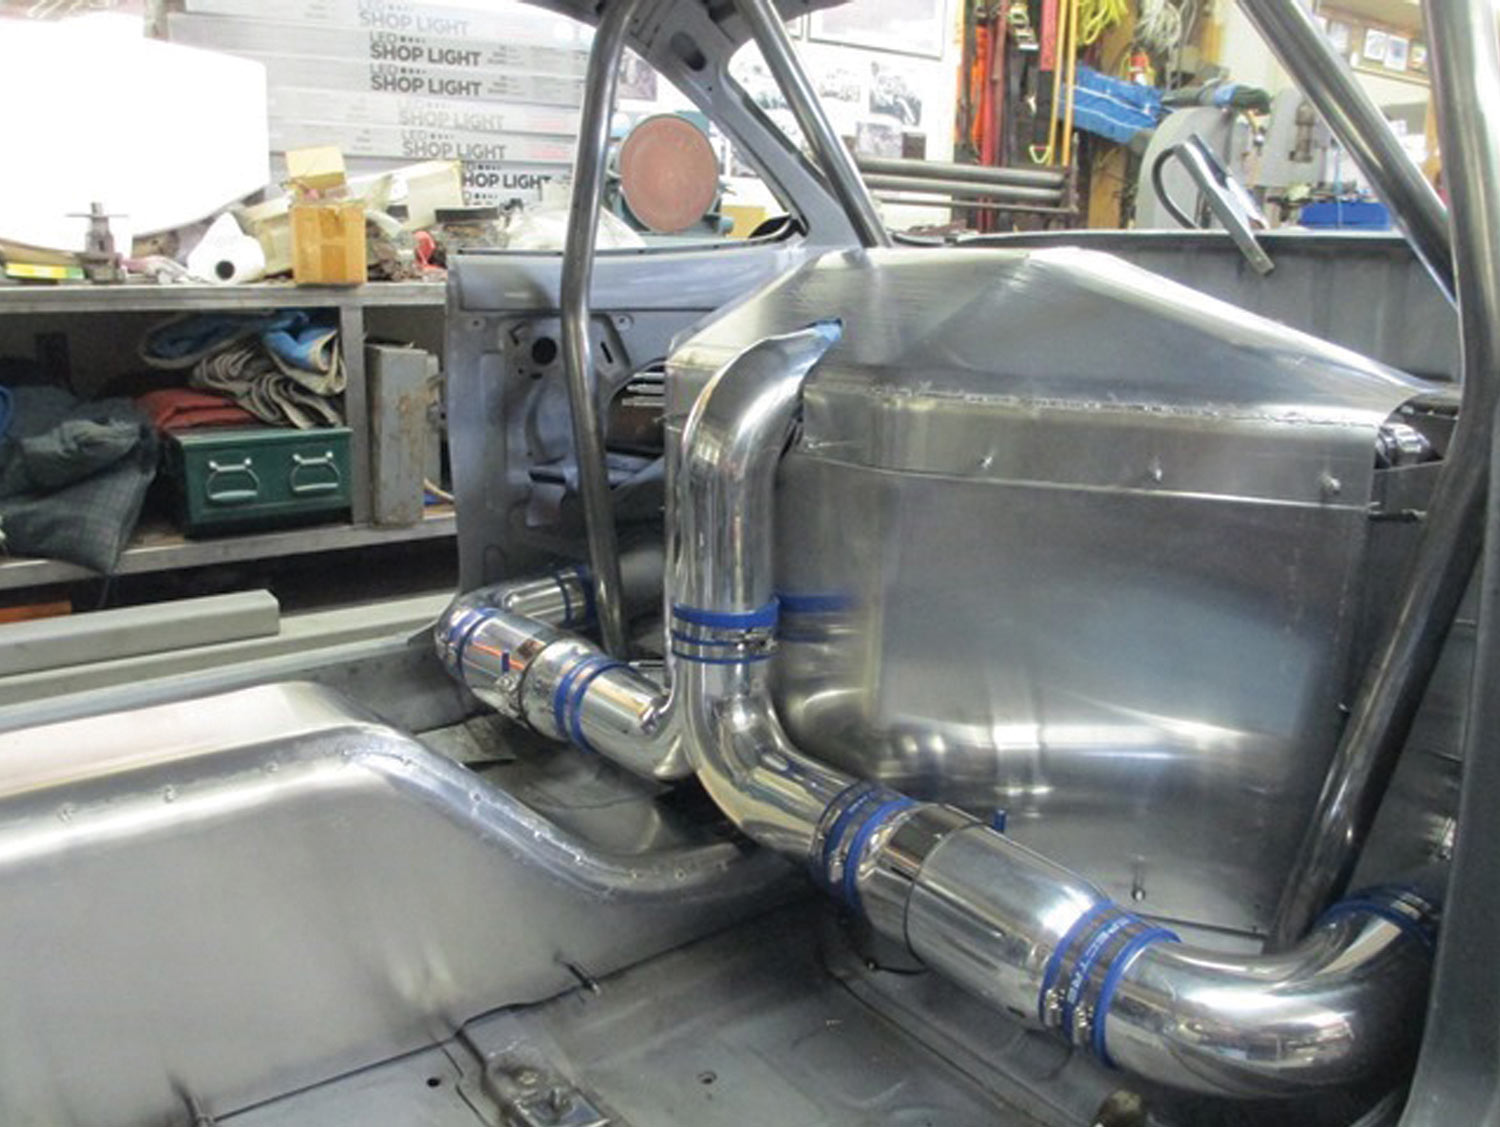 the engine’s air inlet tubes, running outside the engine cover